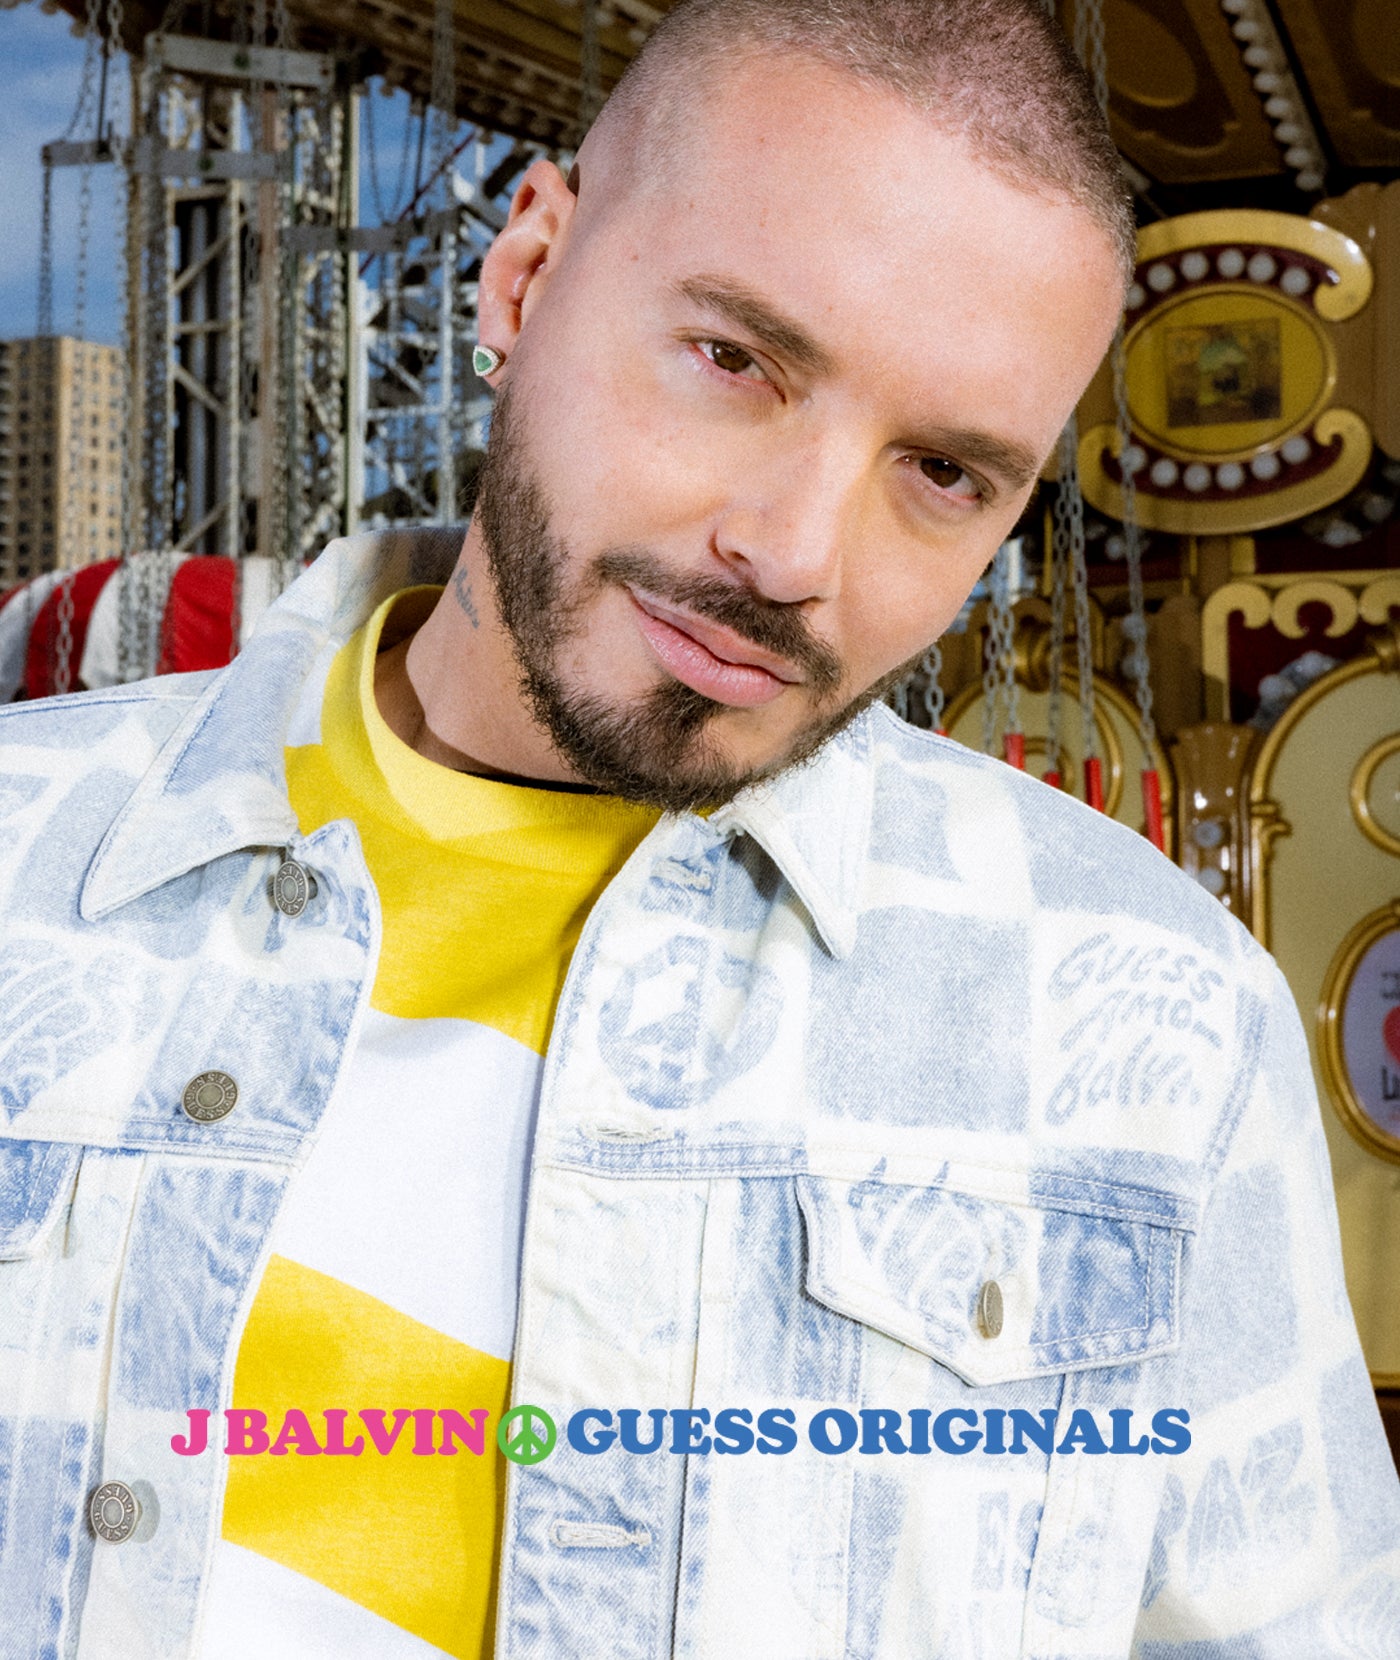 Guess and J Balvin present their collaboration Colores - All